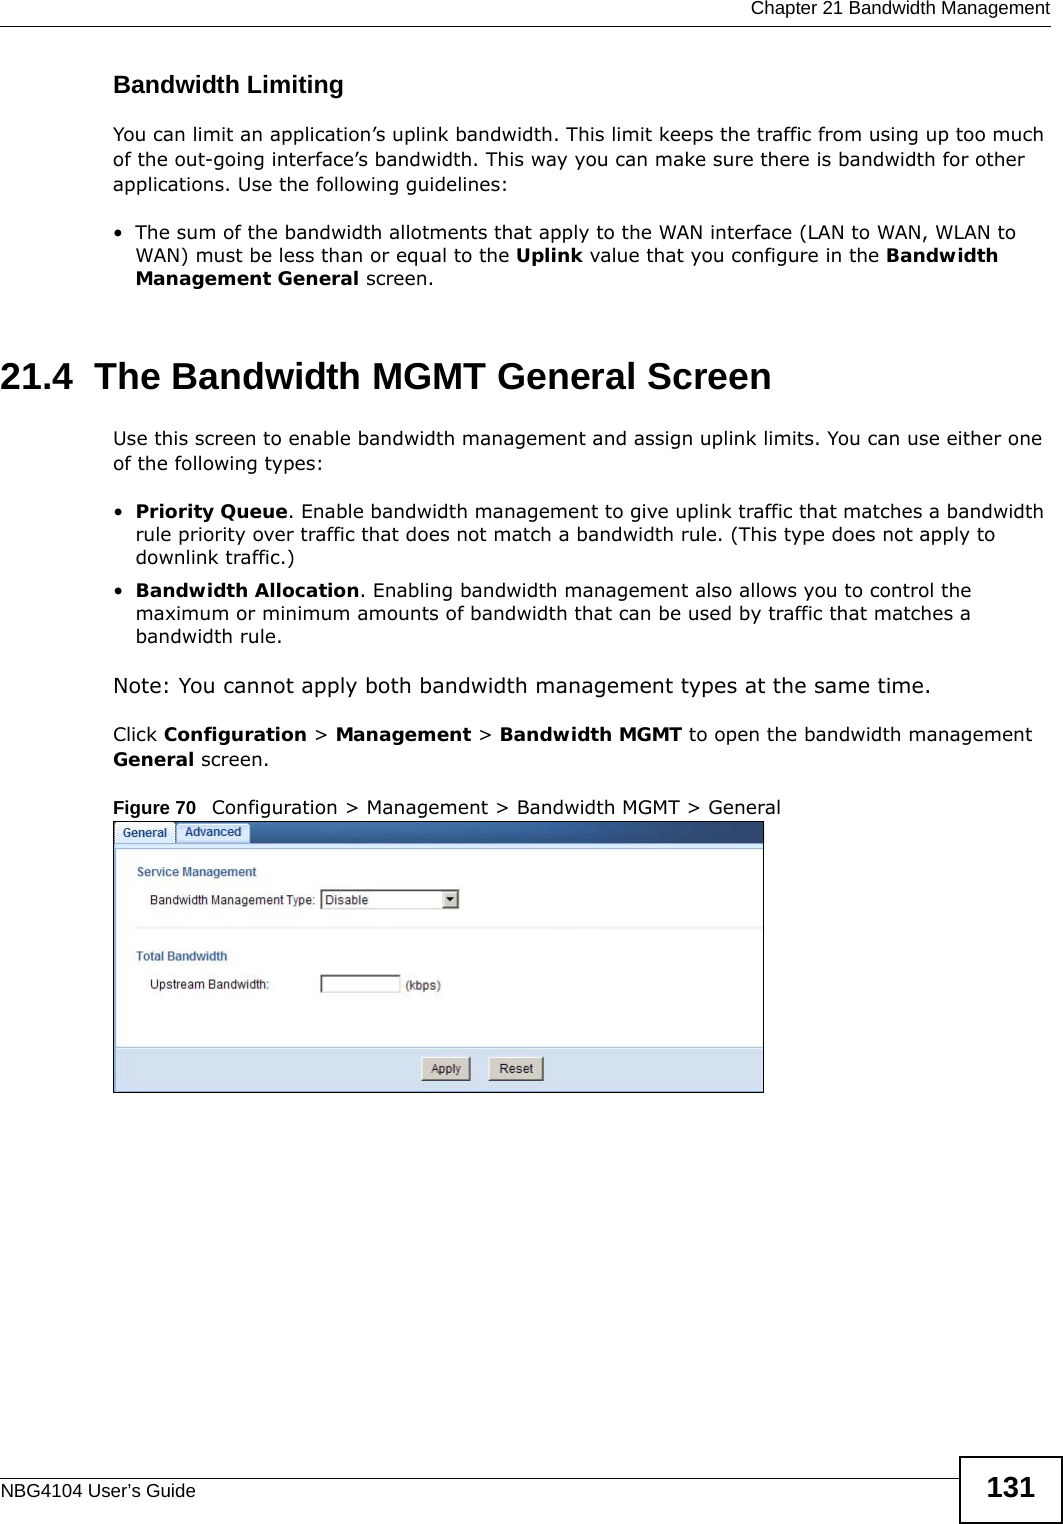  Chapter 21 Bandwidth ManagementNBG4104 User’s Guide 131Bandwidth LimitingYou can limit an application’s uplink bandwidth. This limit keeps the traffic from using up too much of the out-going interface’s bandwidth. This way you can make sure there is bandwidth for other applications. Use the following guidelines:• The sum of the bandwidth allotments that apply to the WAN interface (LAN to WAN, WLAN to WAN) must be less than or equal to the Uplink value that you configure in the Bandwidth Management General screen. 21.4  The Bandwidth MGMT General ScreenUse this screen to enable bandwidth management and assign uplink limits. You can use either one of the following types:•Priority Queue. Enable bandwidth management to give uplink traffic that matches a bandwidth rule priority over traffic that does not match a bandwidth rule. (This type does not apply to downlink traffic.) •Bandwidth Allocation. Enabling bandwidth management also allows you to control the maximum or minimum amounts of bandwidth that can be used by traffic that matches a bandwidth rule.Note: You cannot apply both bandwidth management types at the same time.Click Configuration &gt; Management &gt; Bandwidth MGMT to open the bandwidth management General screen.Figure 70   Configuration &gt; Management &gt; Bandwidth MGMT &gt; General